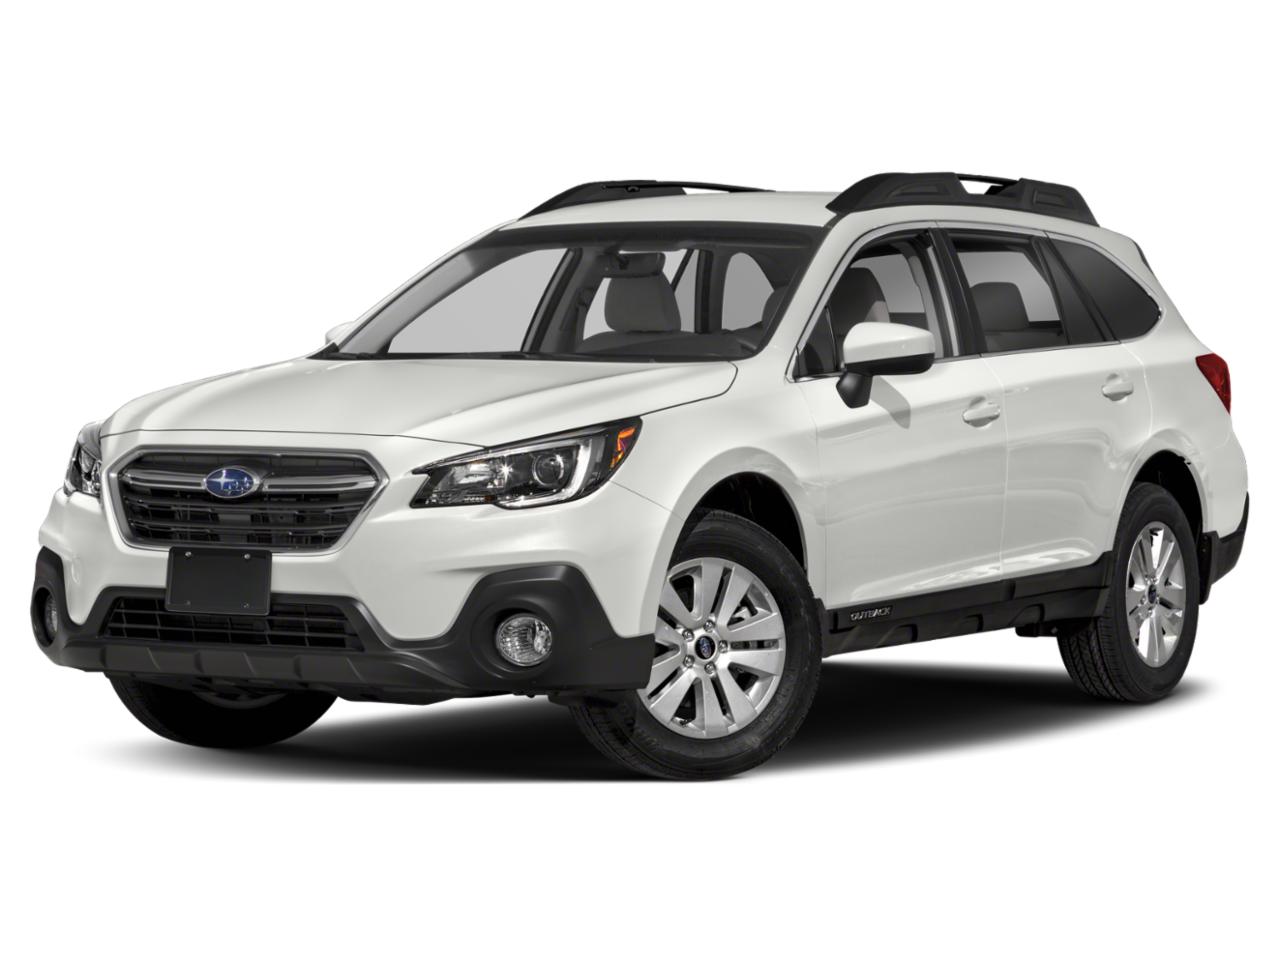 Used 2019 Subaru Outback Premium with VIN 4S4BSAFC5K3249904 for sale in Worthington, Minnesota